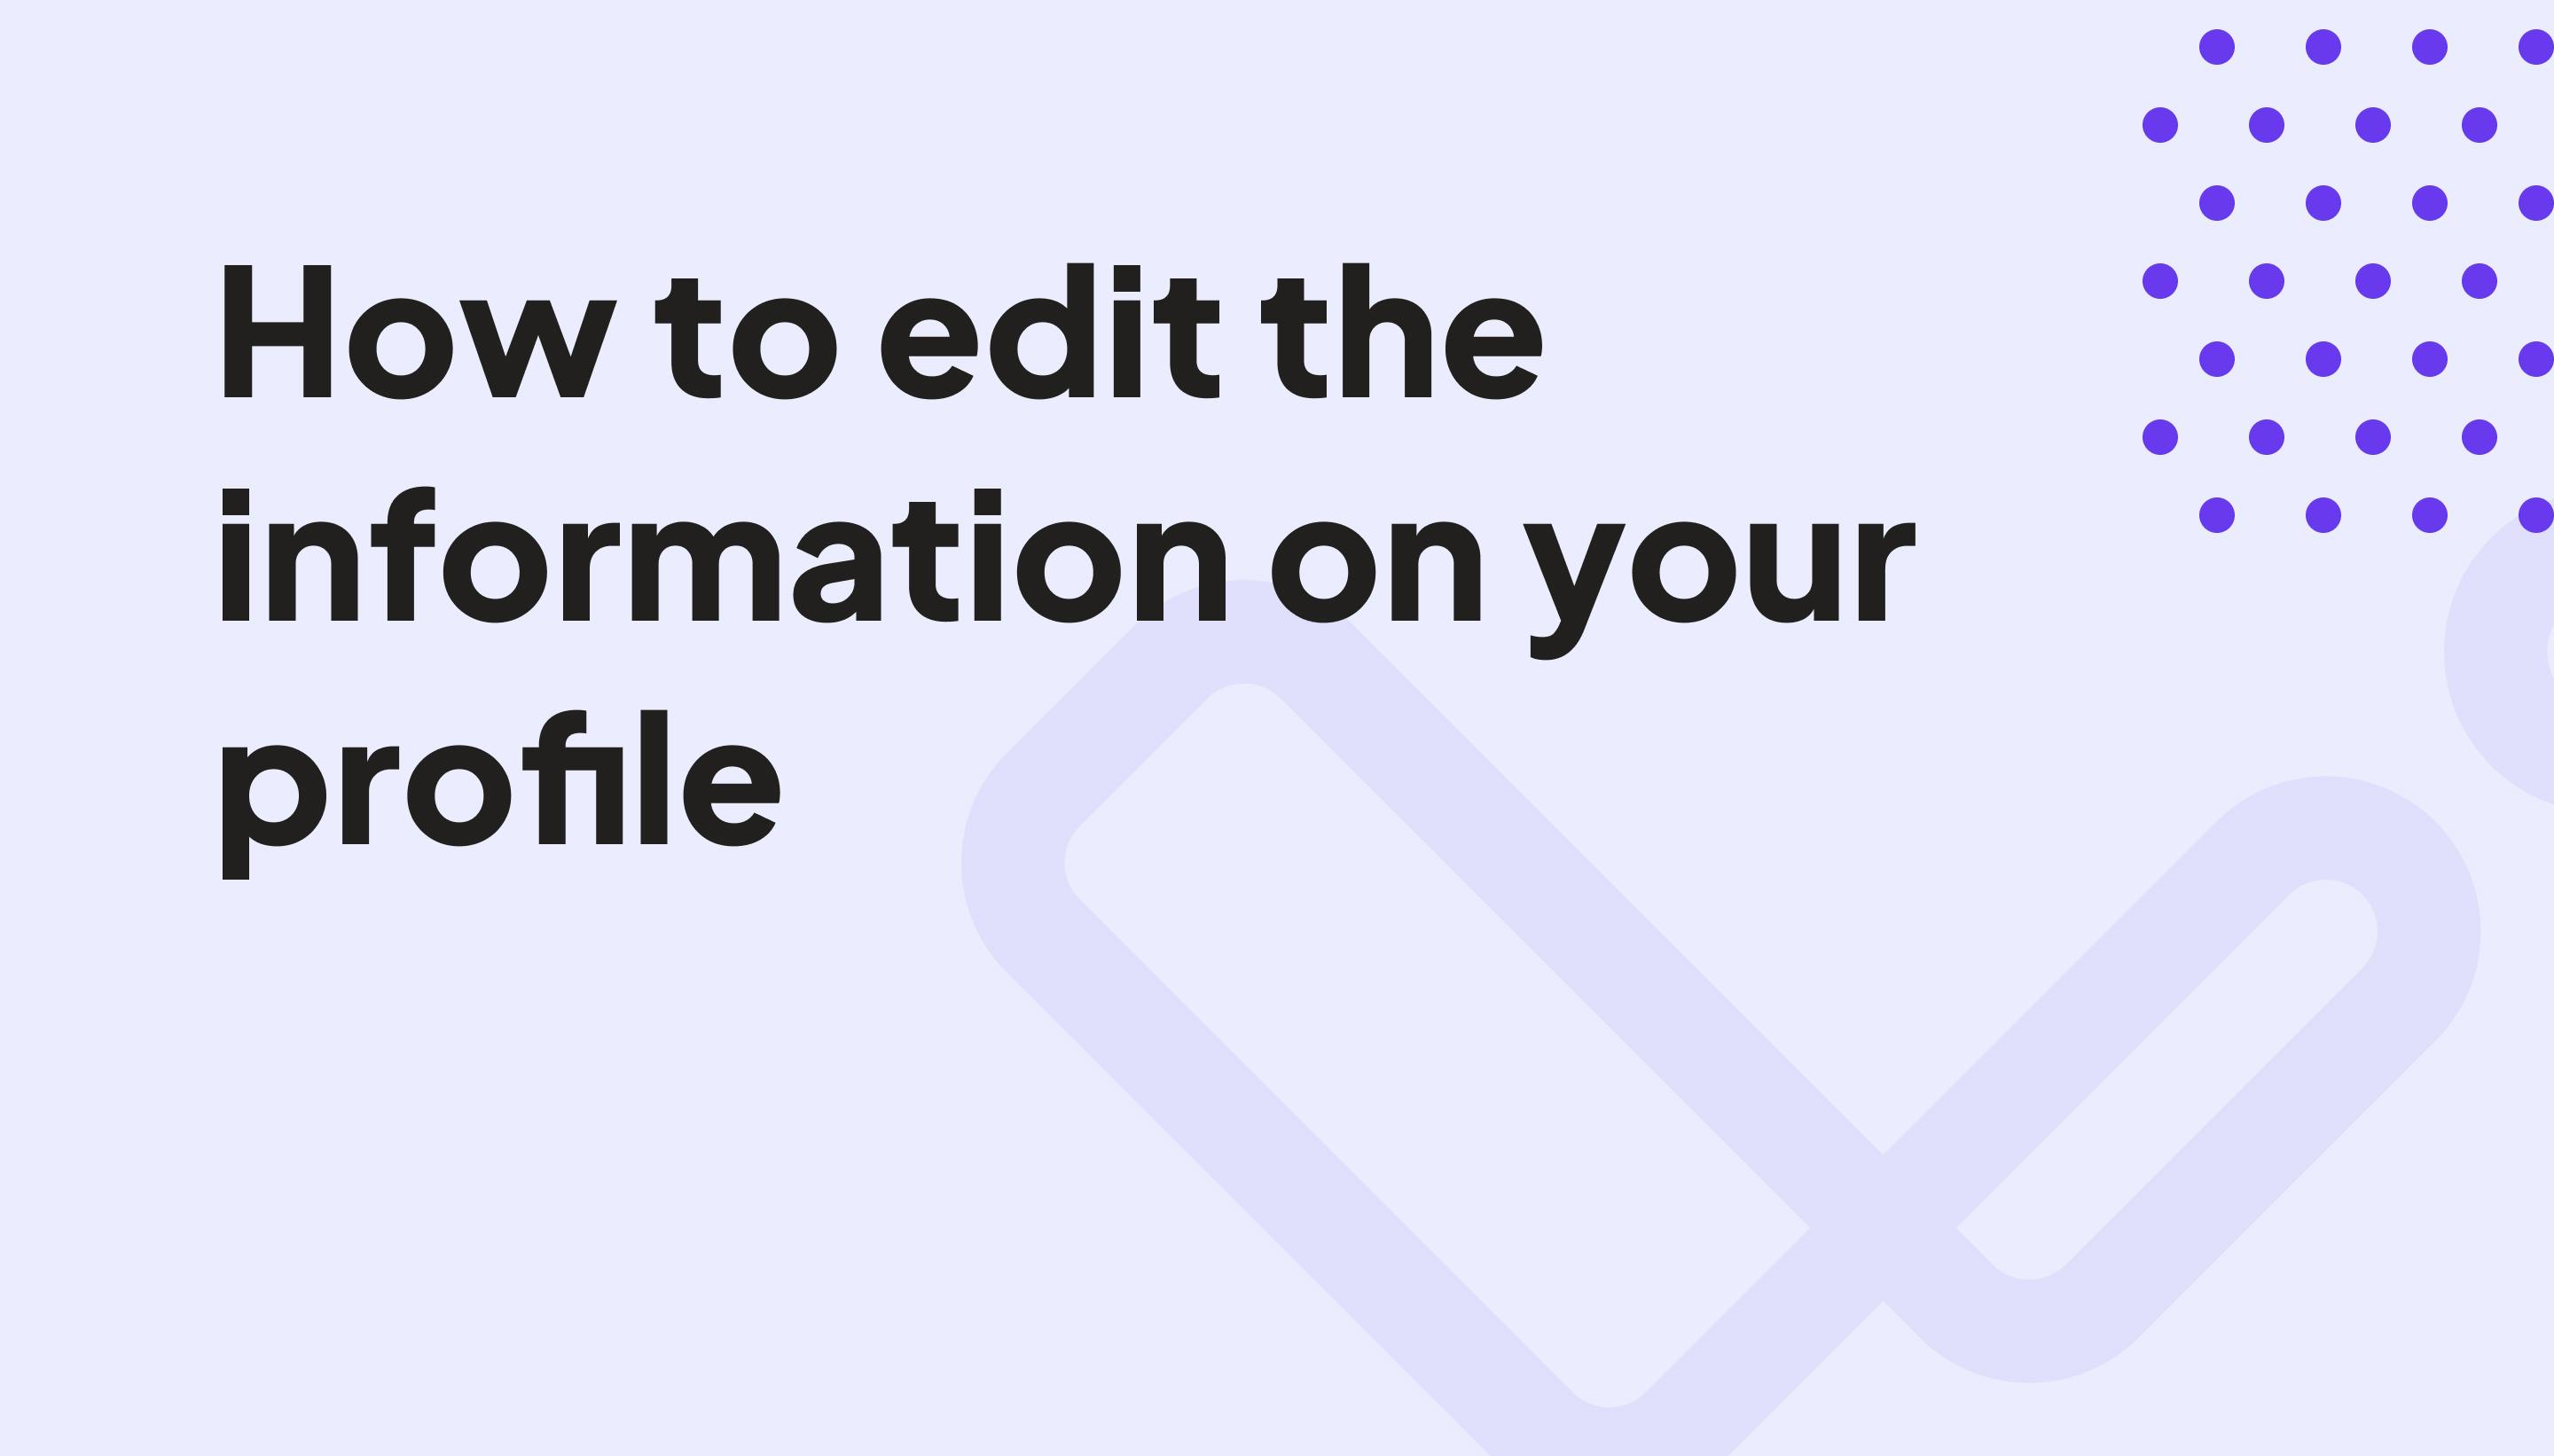 A short guide on how to edit your professional information on your Vitaely.me profile.